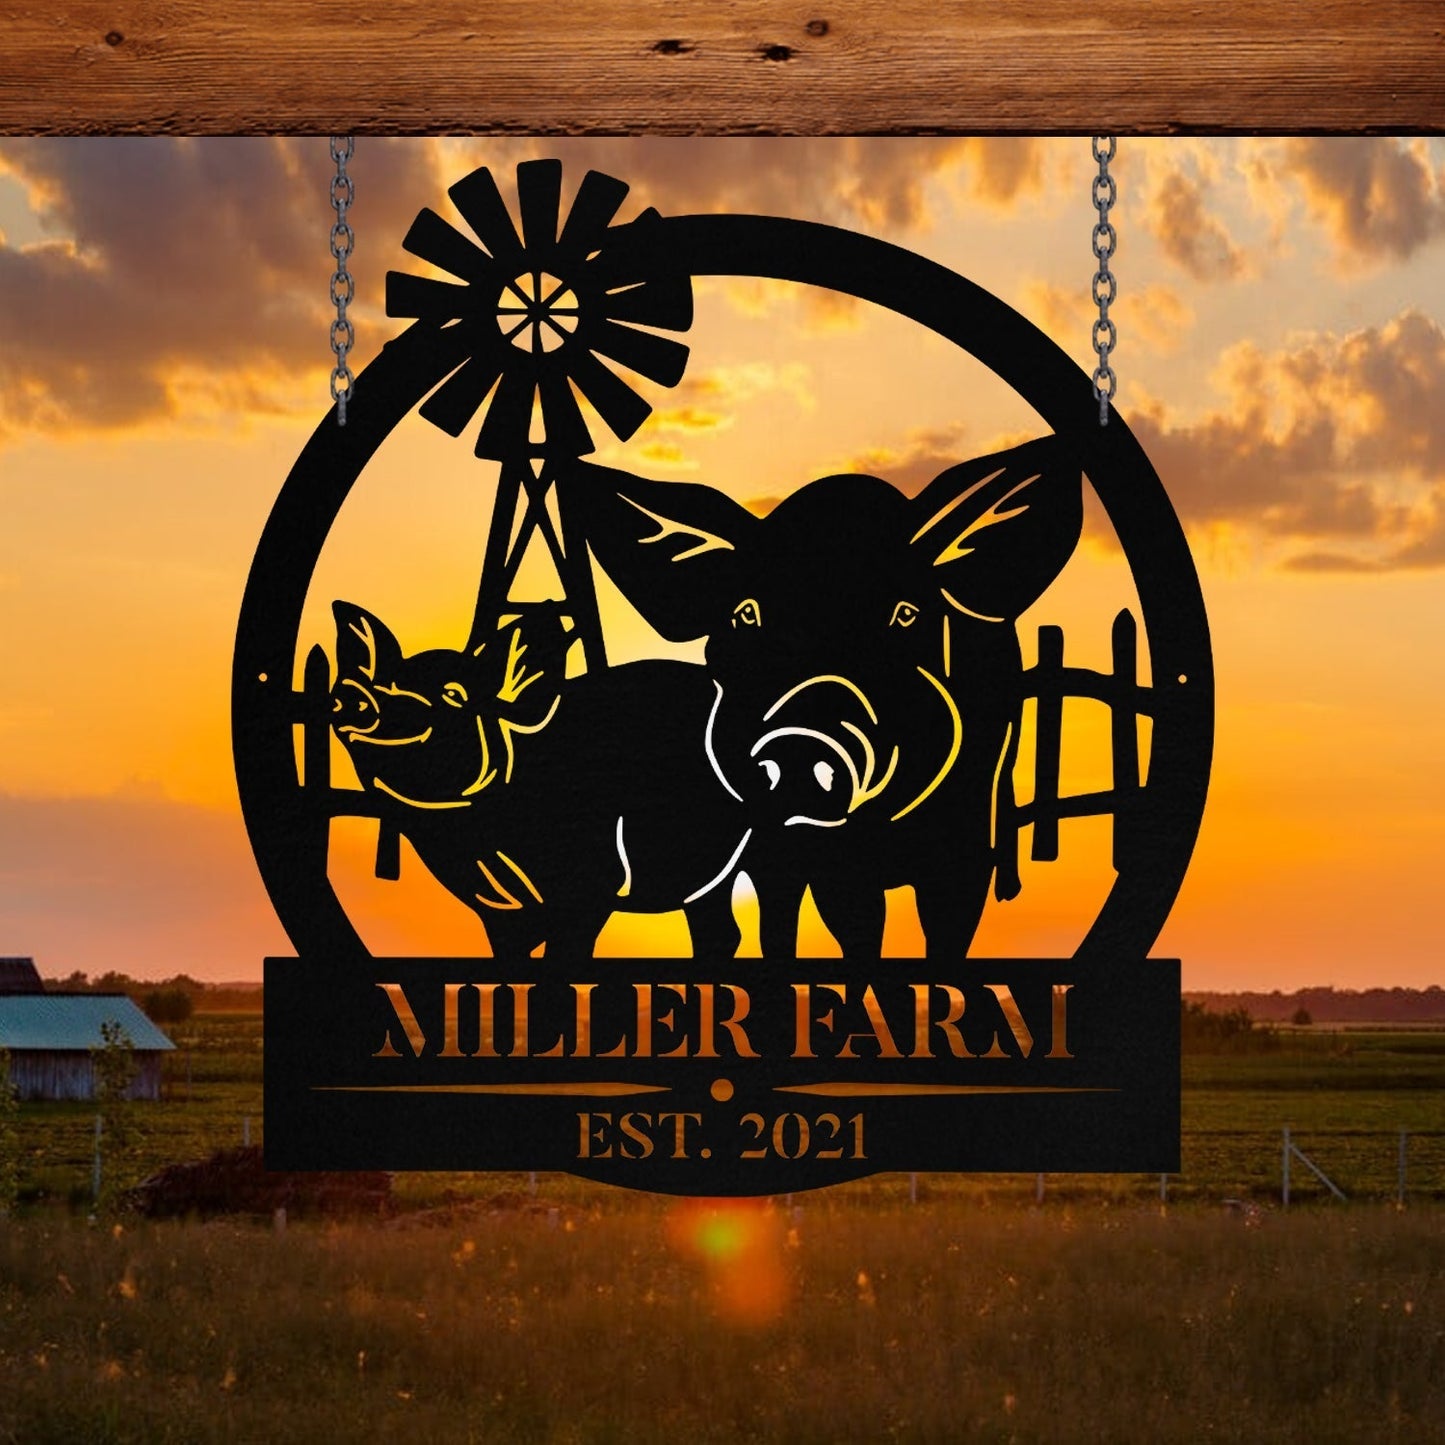 Personalized Metal Farm Sign Pig Windmill Monogram Custom Outdoor Farmhouse Front Gate Entry Road Wall Decor Art Gift